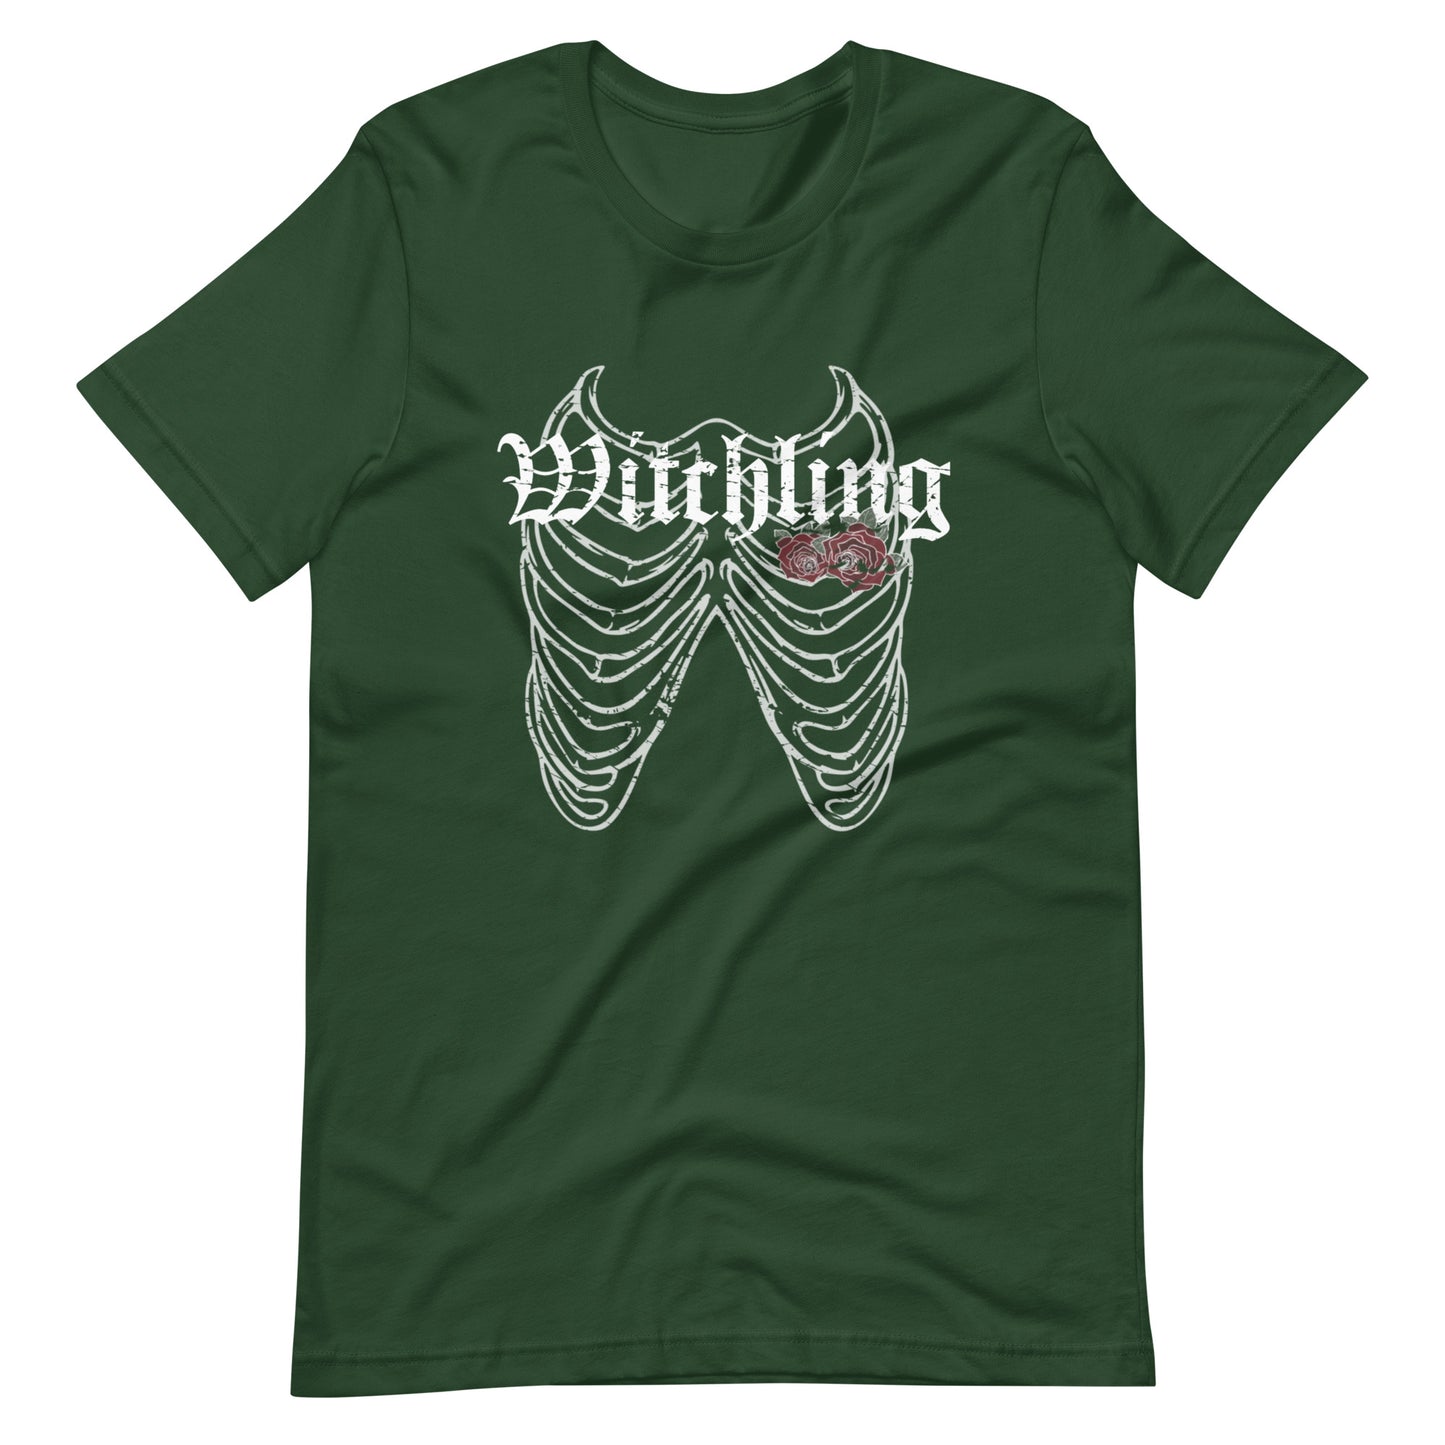 Witchling -The Coven - BellaCanvas